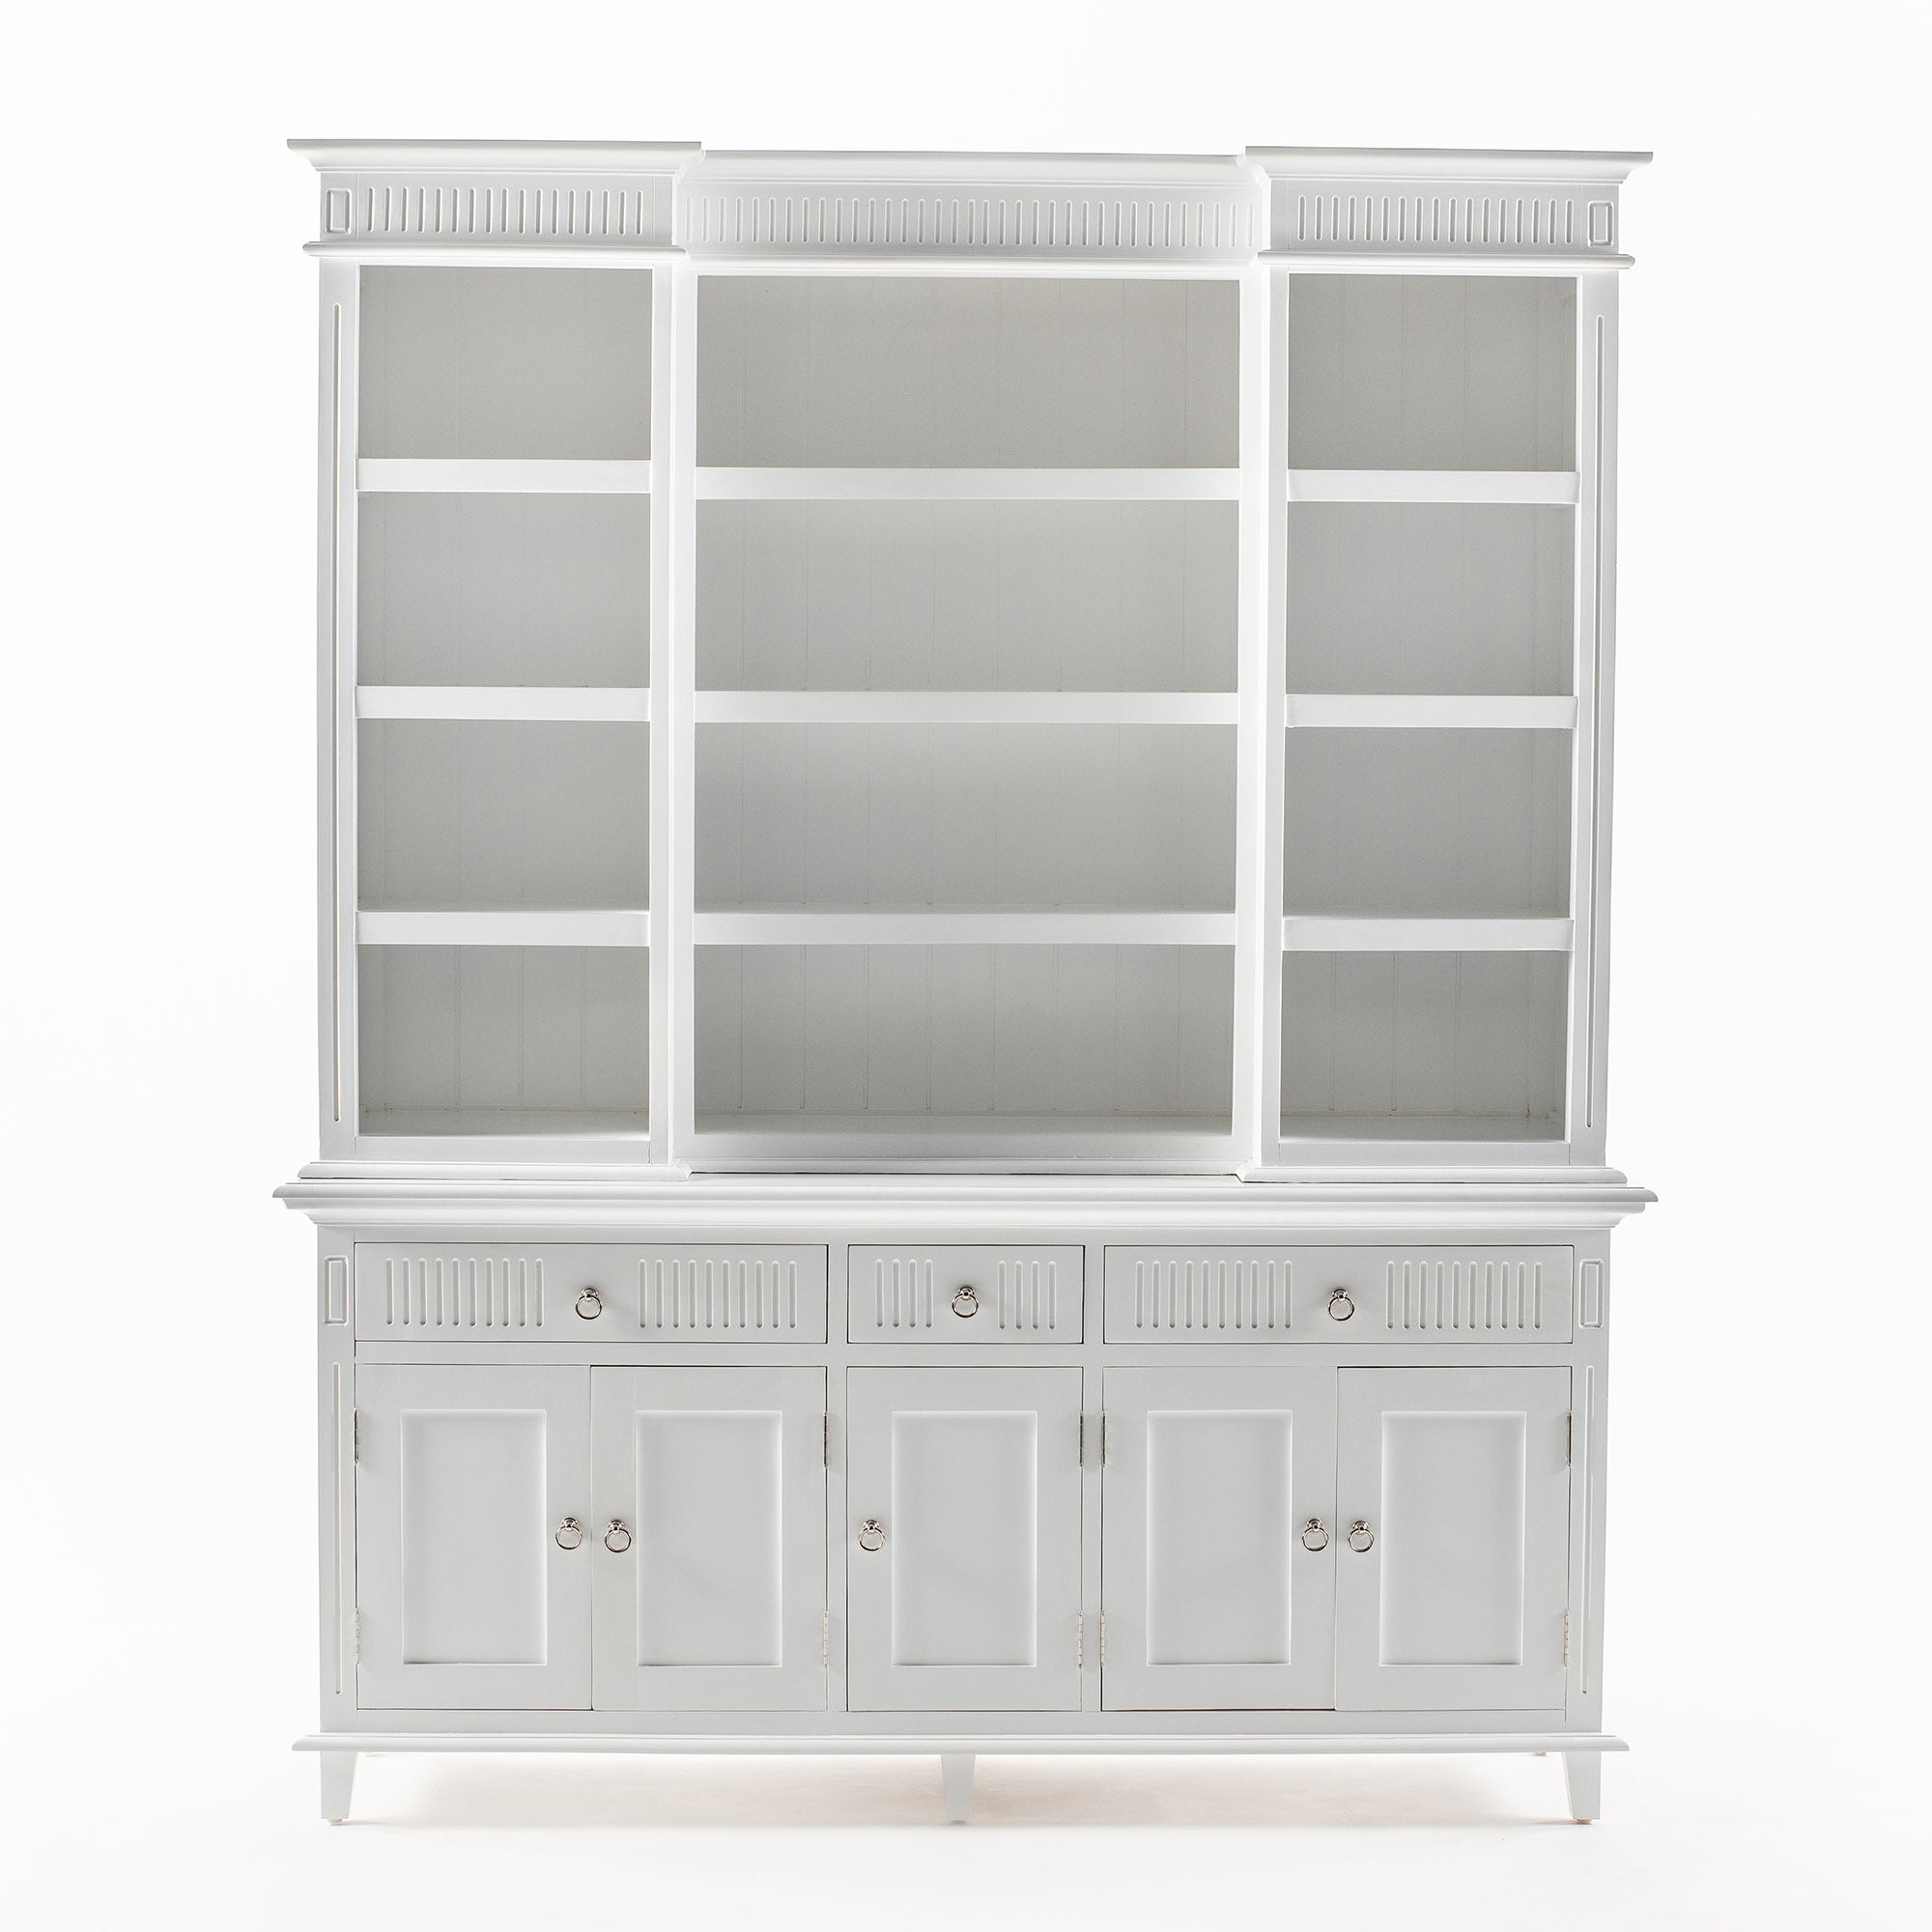 Skansen Nordic Design Classic White Kitchen Hutch Cabinet with 5 Doors 3 Drawers